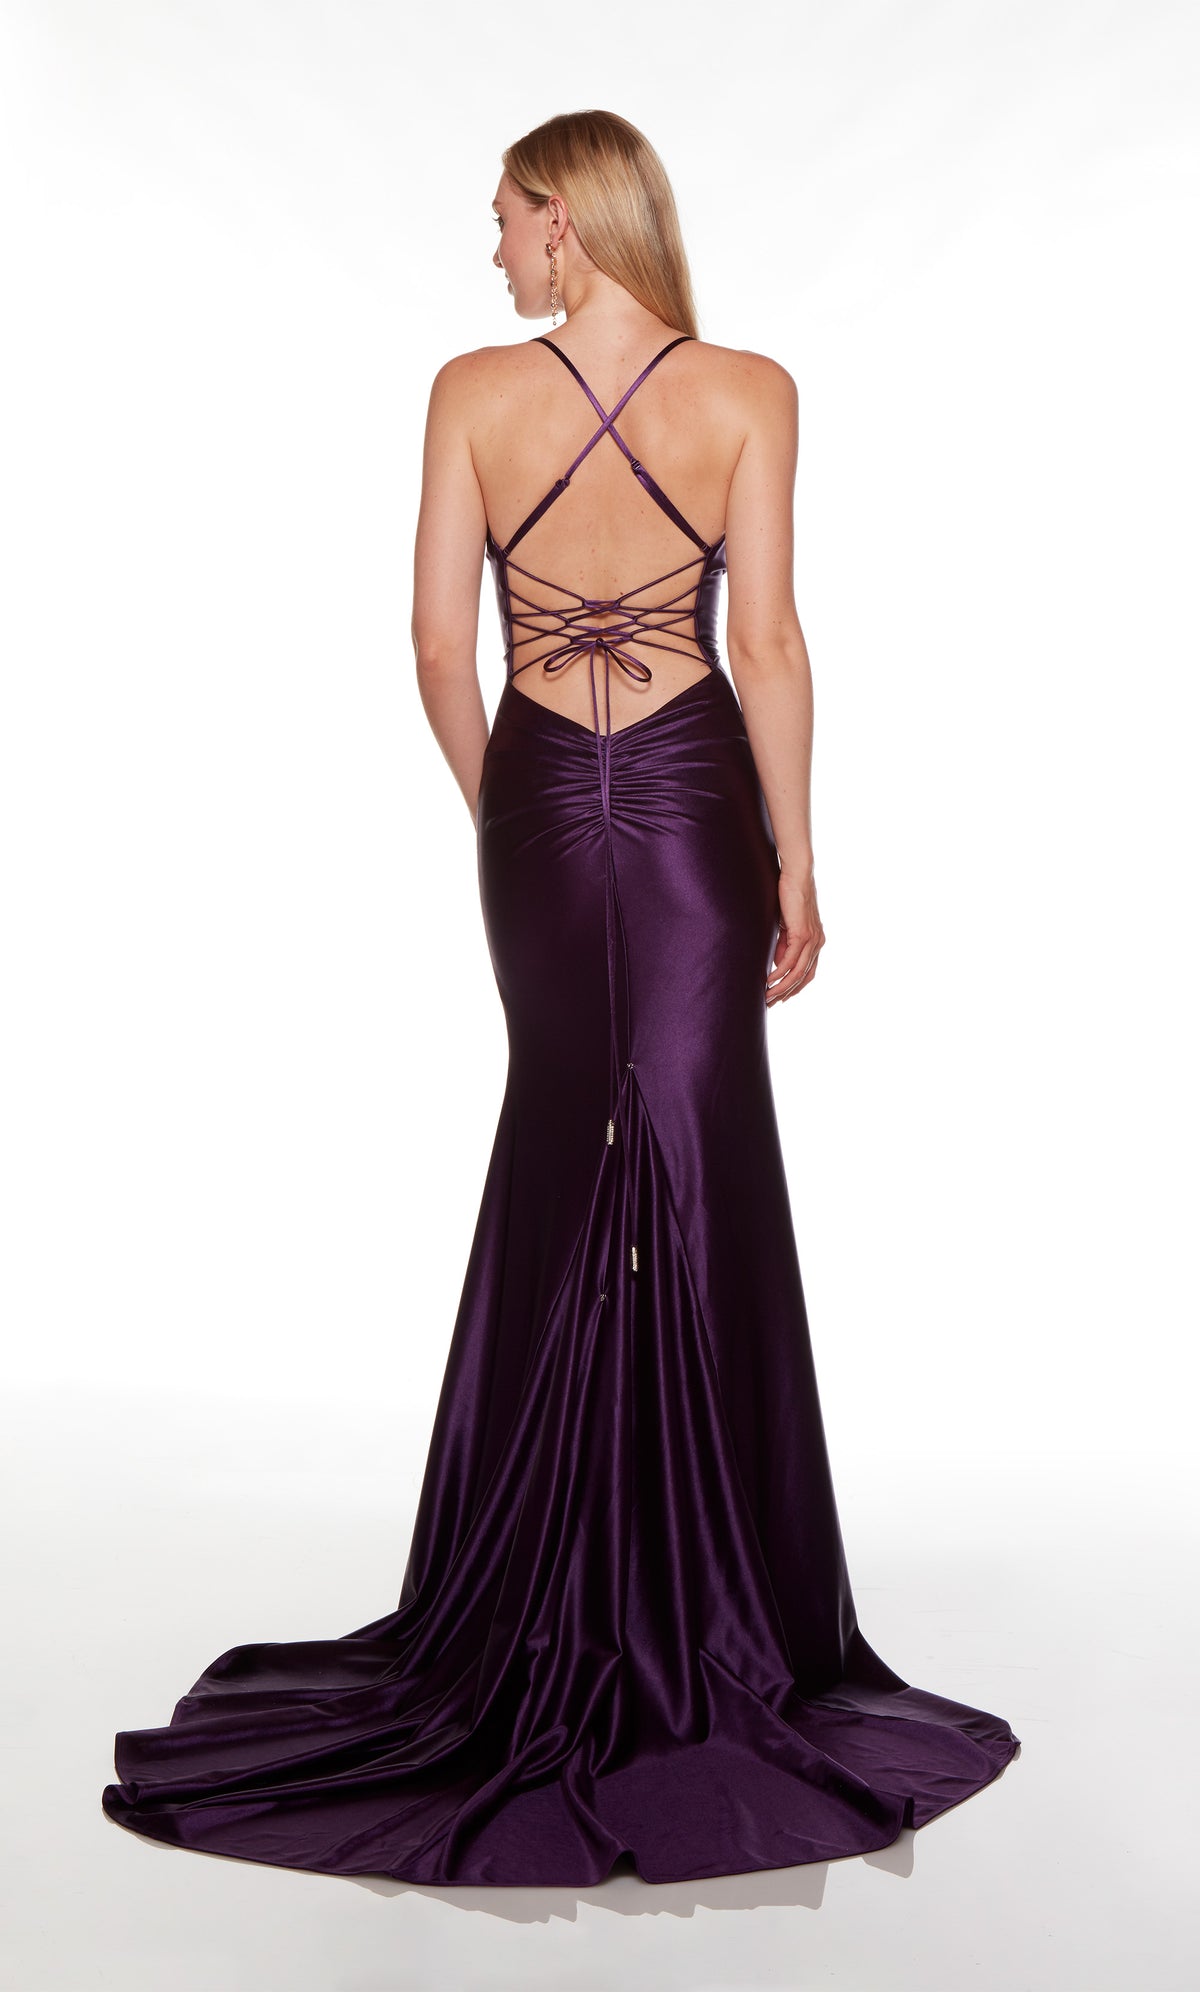 Strappy back satin formal dress with a long train in purple.